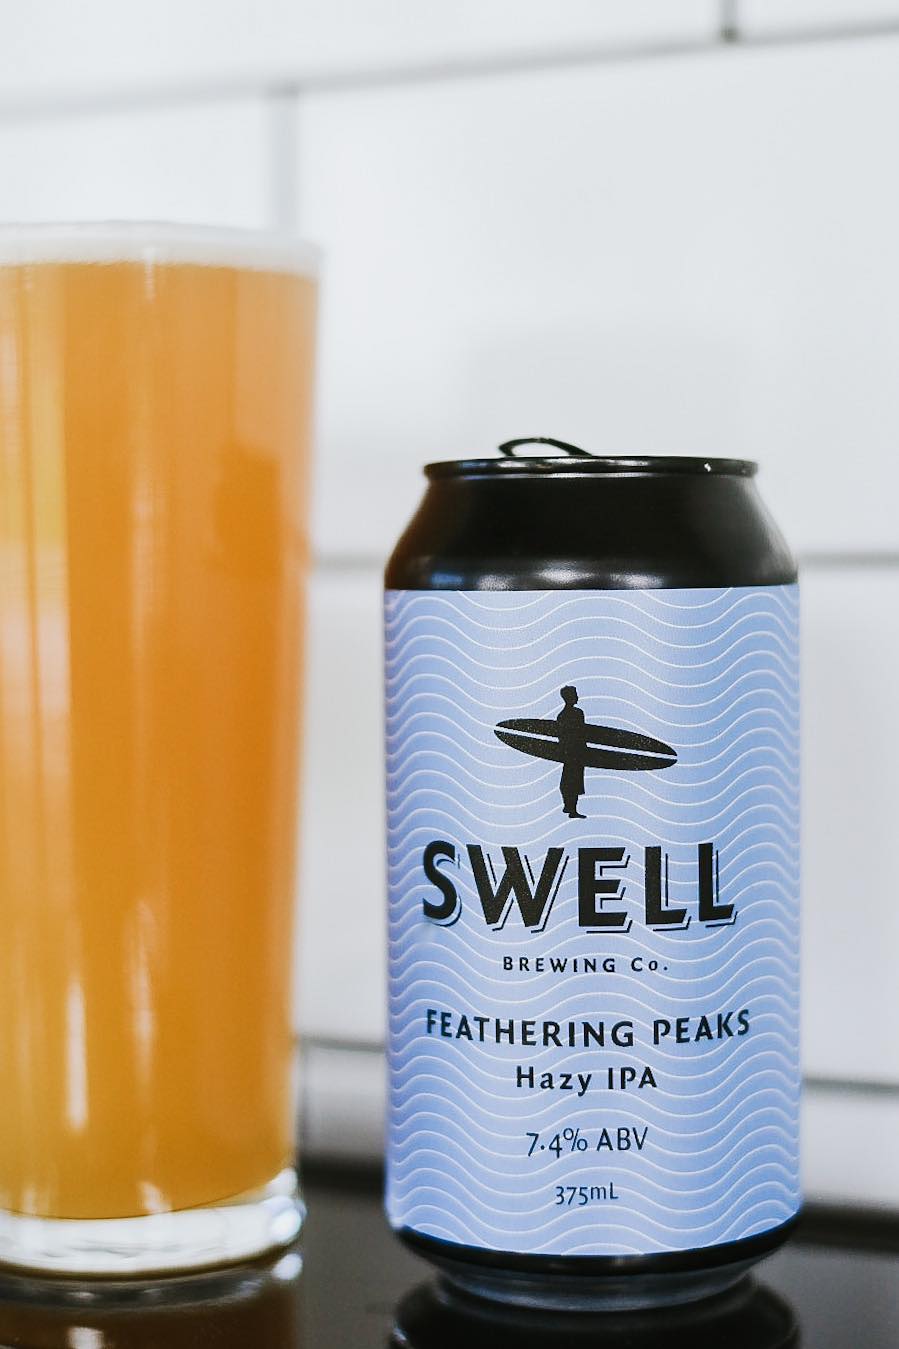 Swell Feathering Peaks IPA review from The Crafty Pint